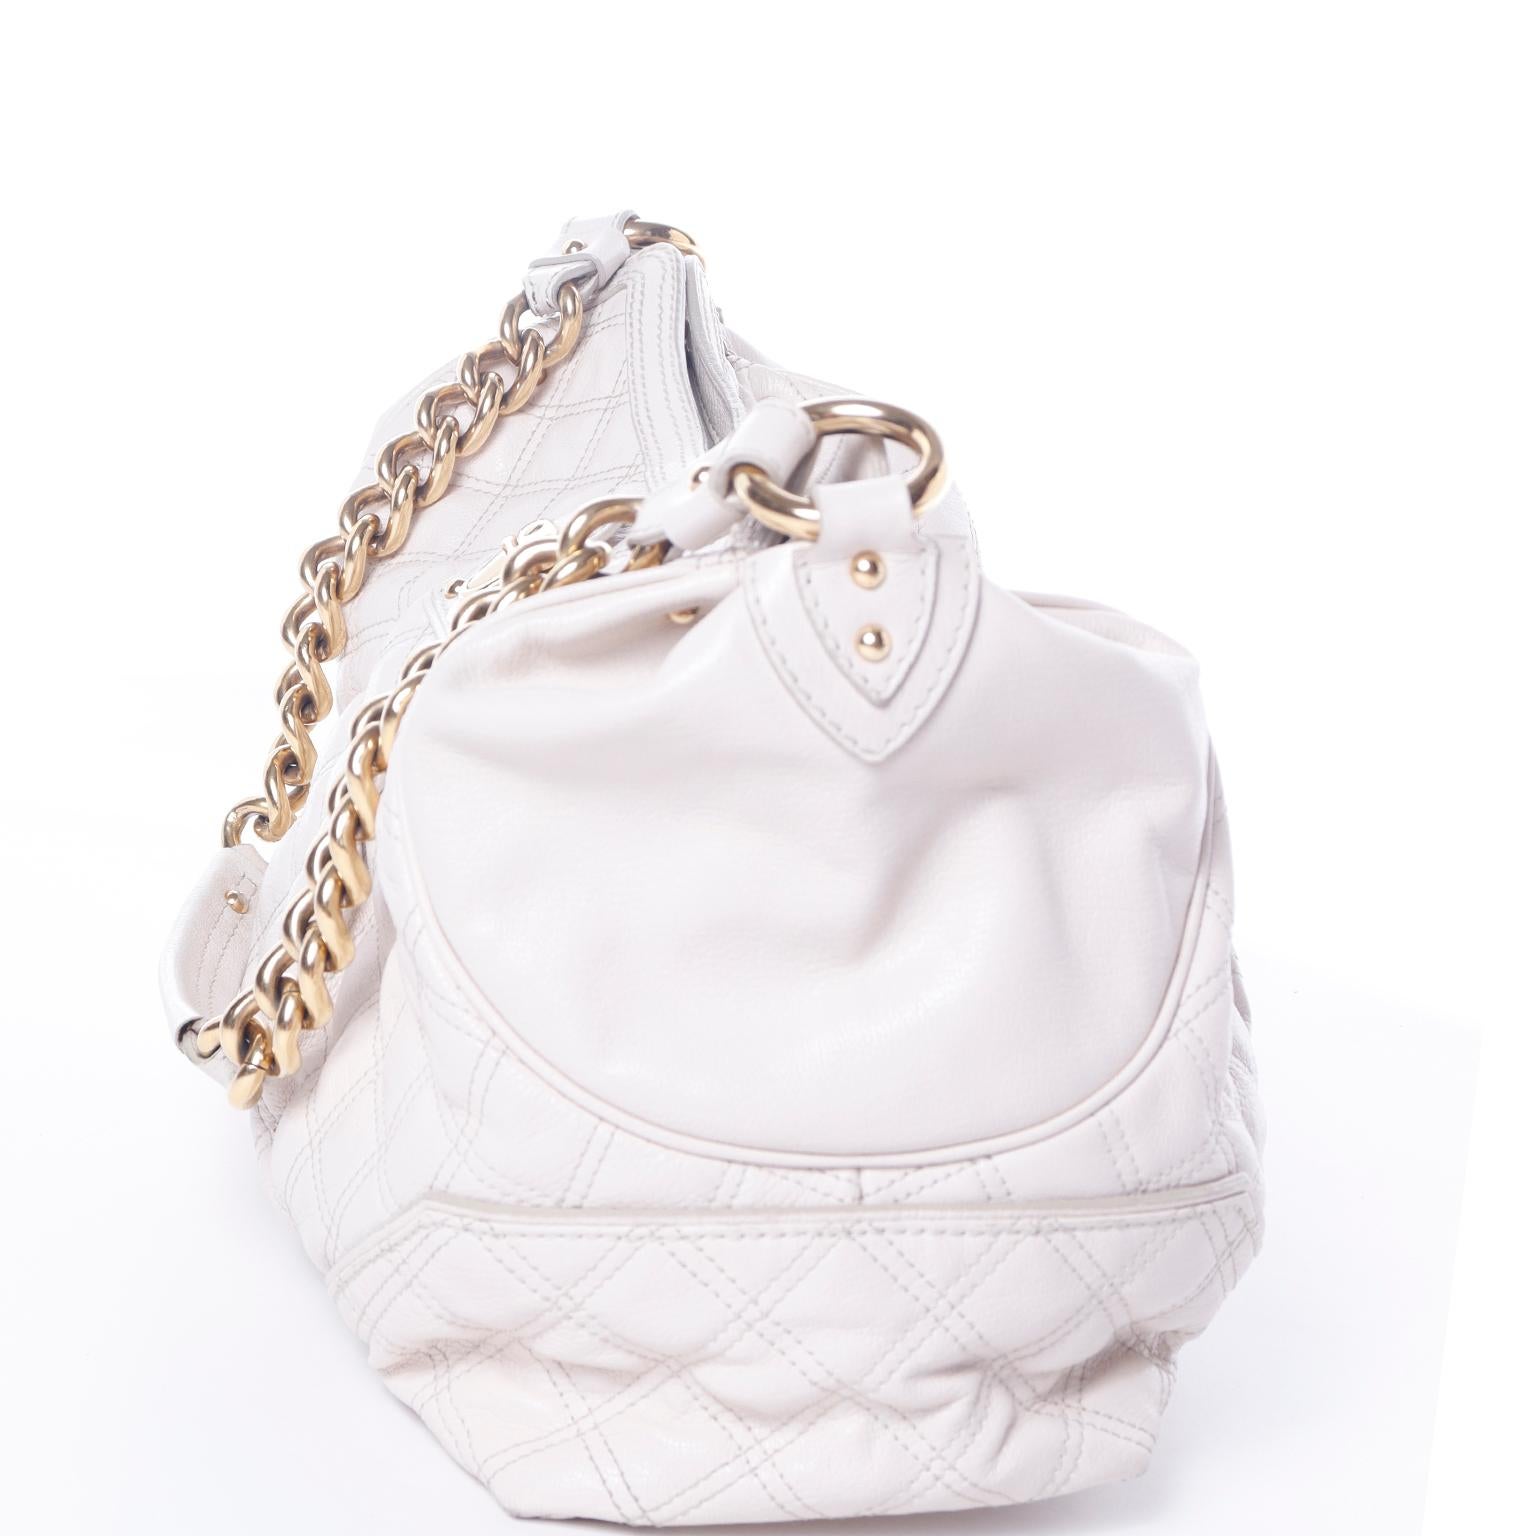 Gray Marc Jacobs Handbag Bone Quilted Leather Zip Top Hobo Bag With Gold Chain Strap For Sale